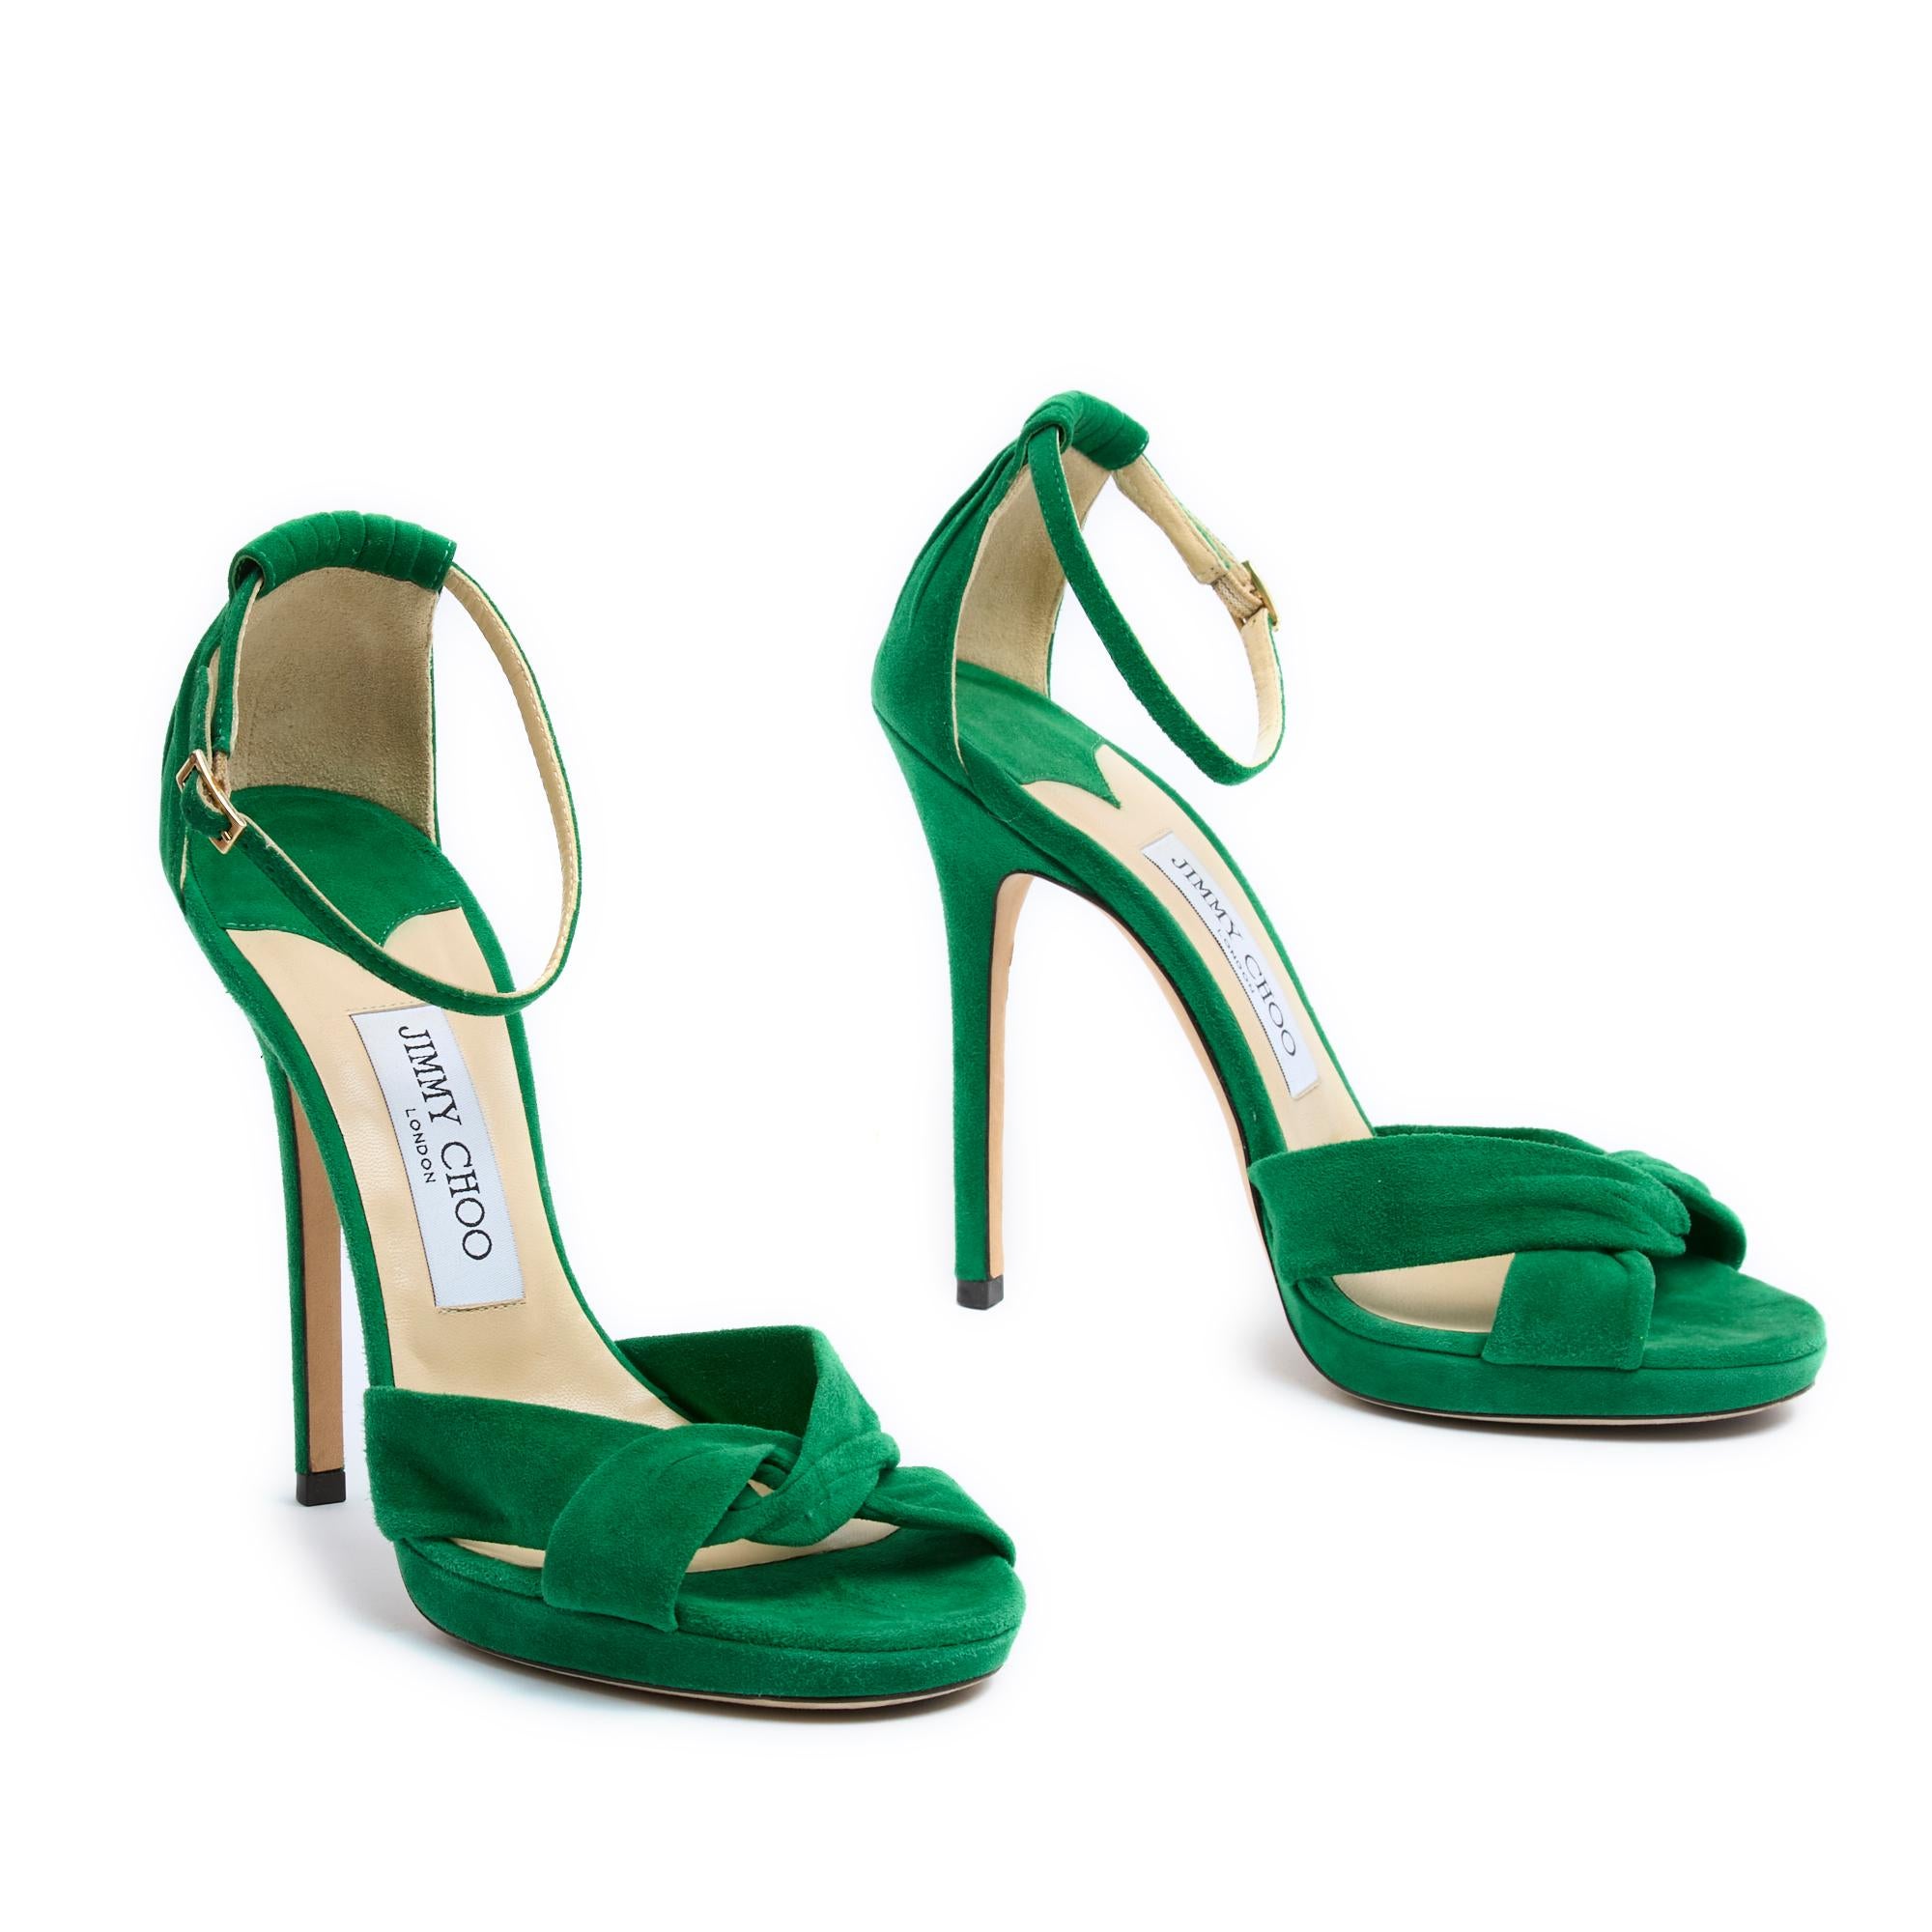 Jimmy Choo sandals in green suede, 2 wide soft crossed straps on the front of the foot, thin strap closed on the ankle with a light gold metal pin buckle, stiletto heel and small front platform. Size EU39 or UK6 and US8.5: heel 12.5 cm, front